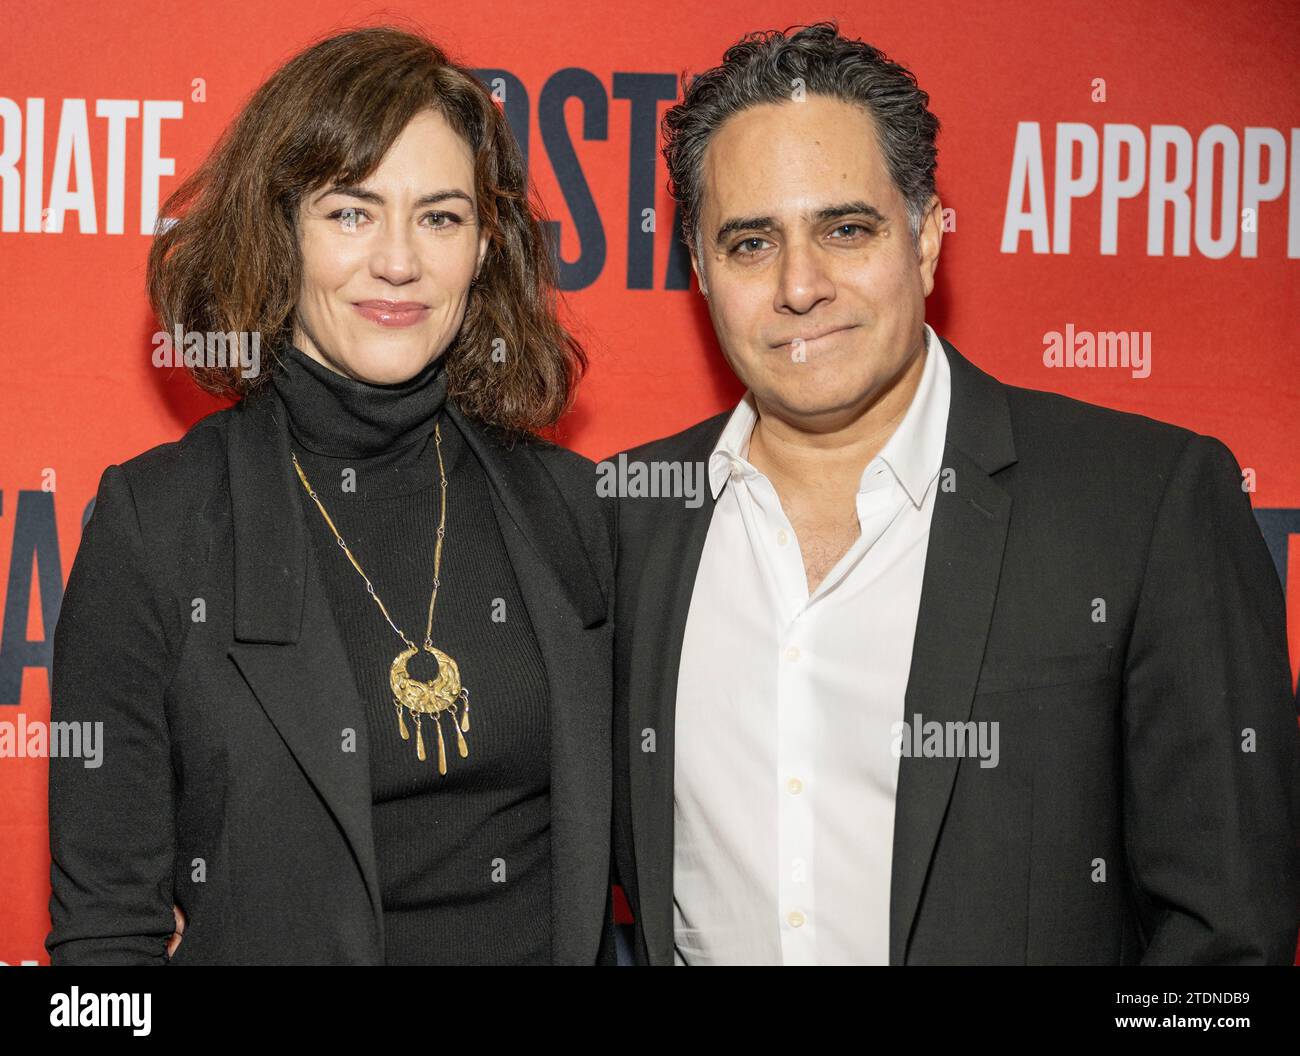 Maggie Siff and Rajiv Joseph attend Broadway opening night of the 'Appropriate' at Hayes Theater in New York on December 18, 2023 Stock Photo